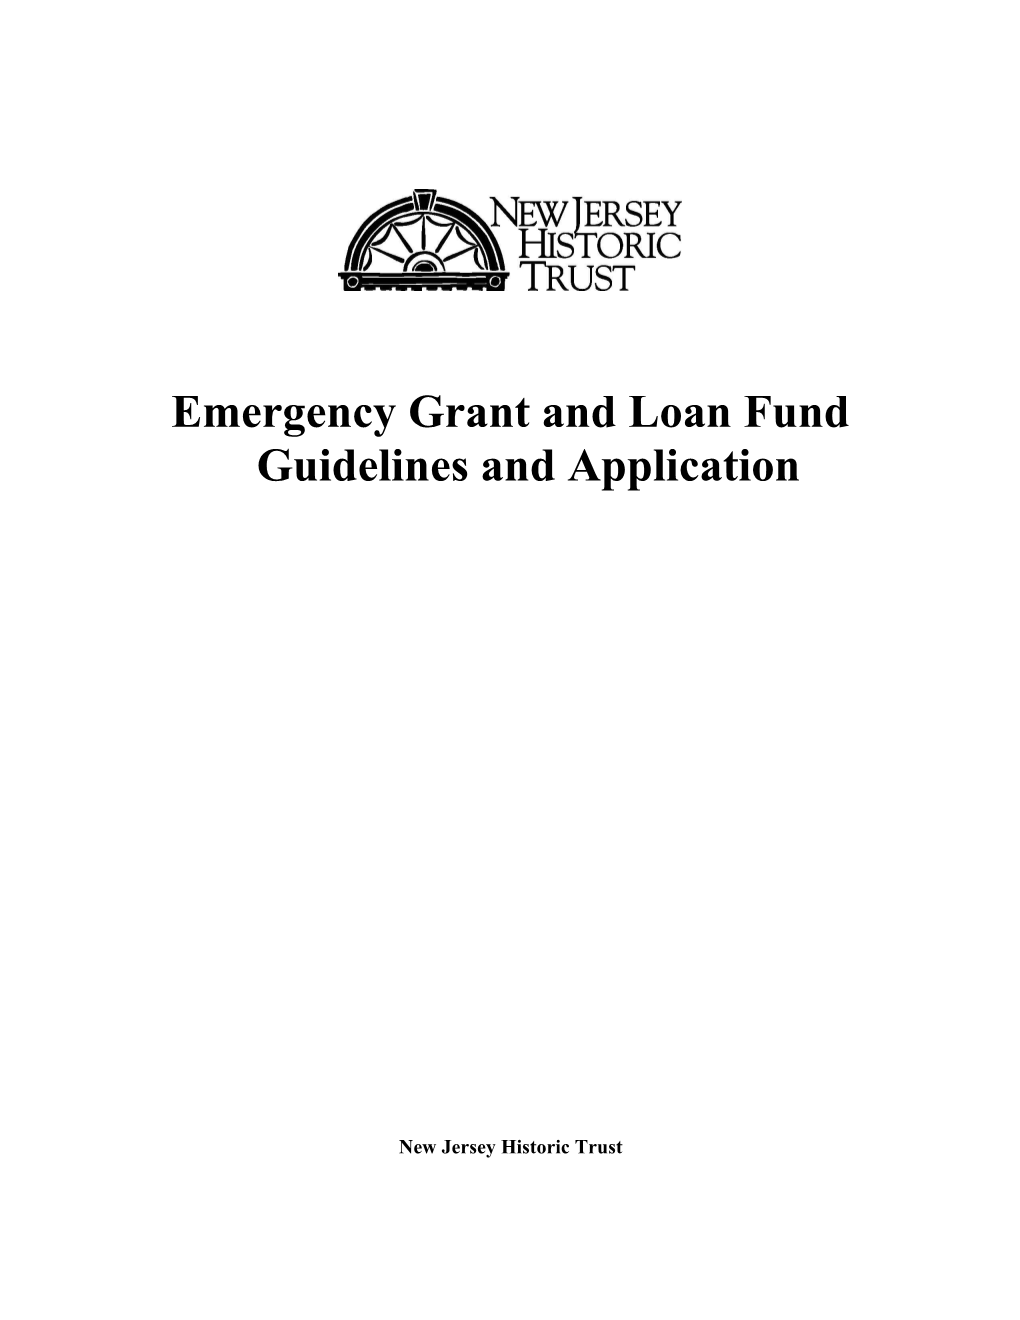 Emergency Grant and Loan Fund Guidelines and Application